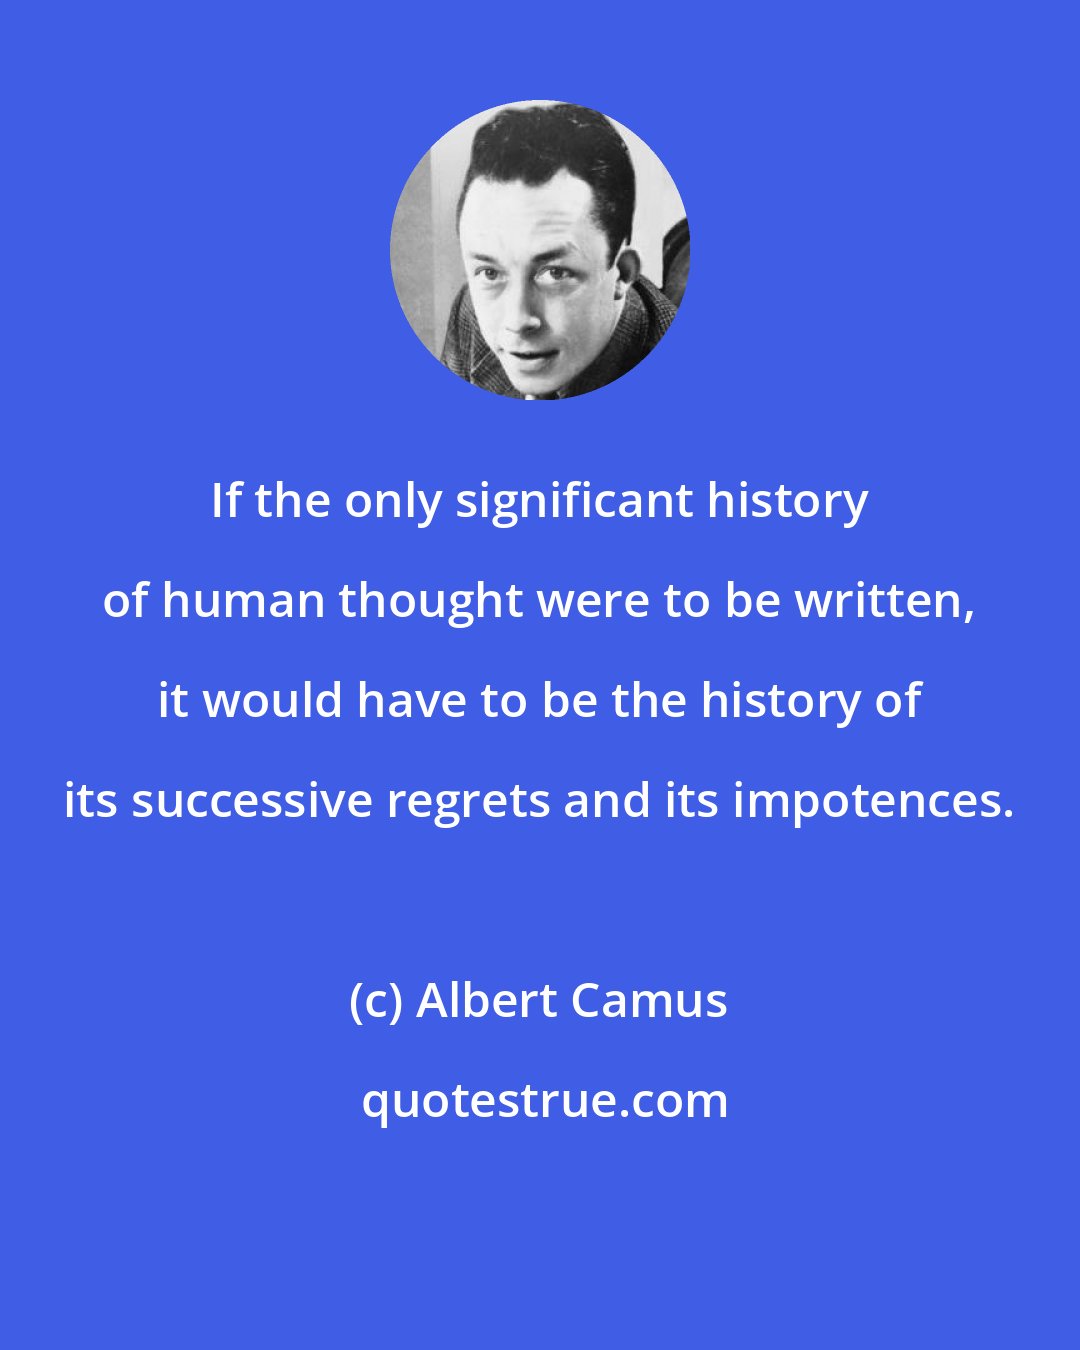 Albert Camus: If the only significant history of human thought were to be written, it would have to be the history of its successive regrets and its impotences.